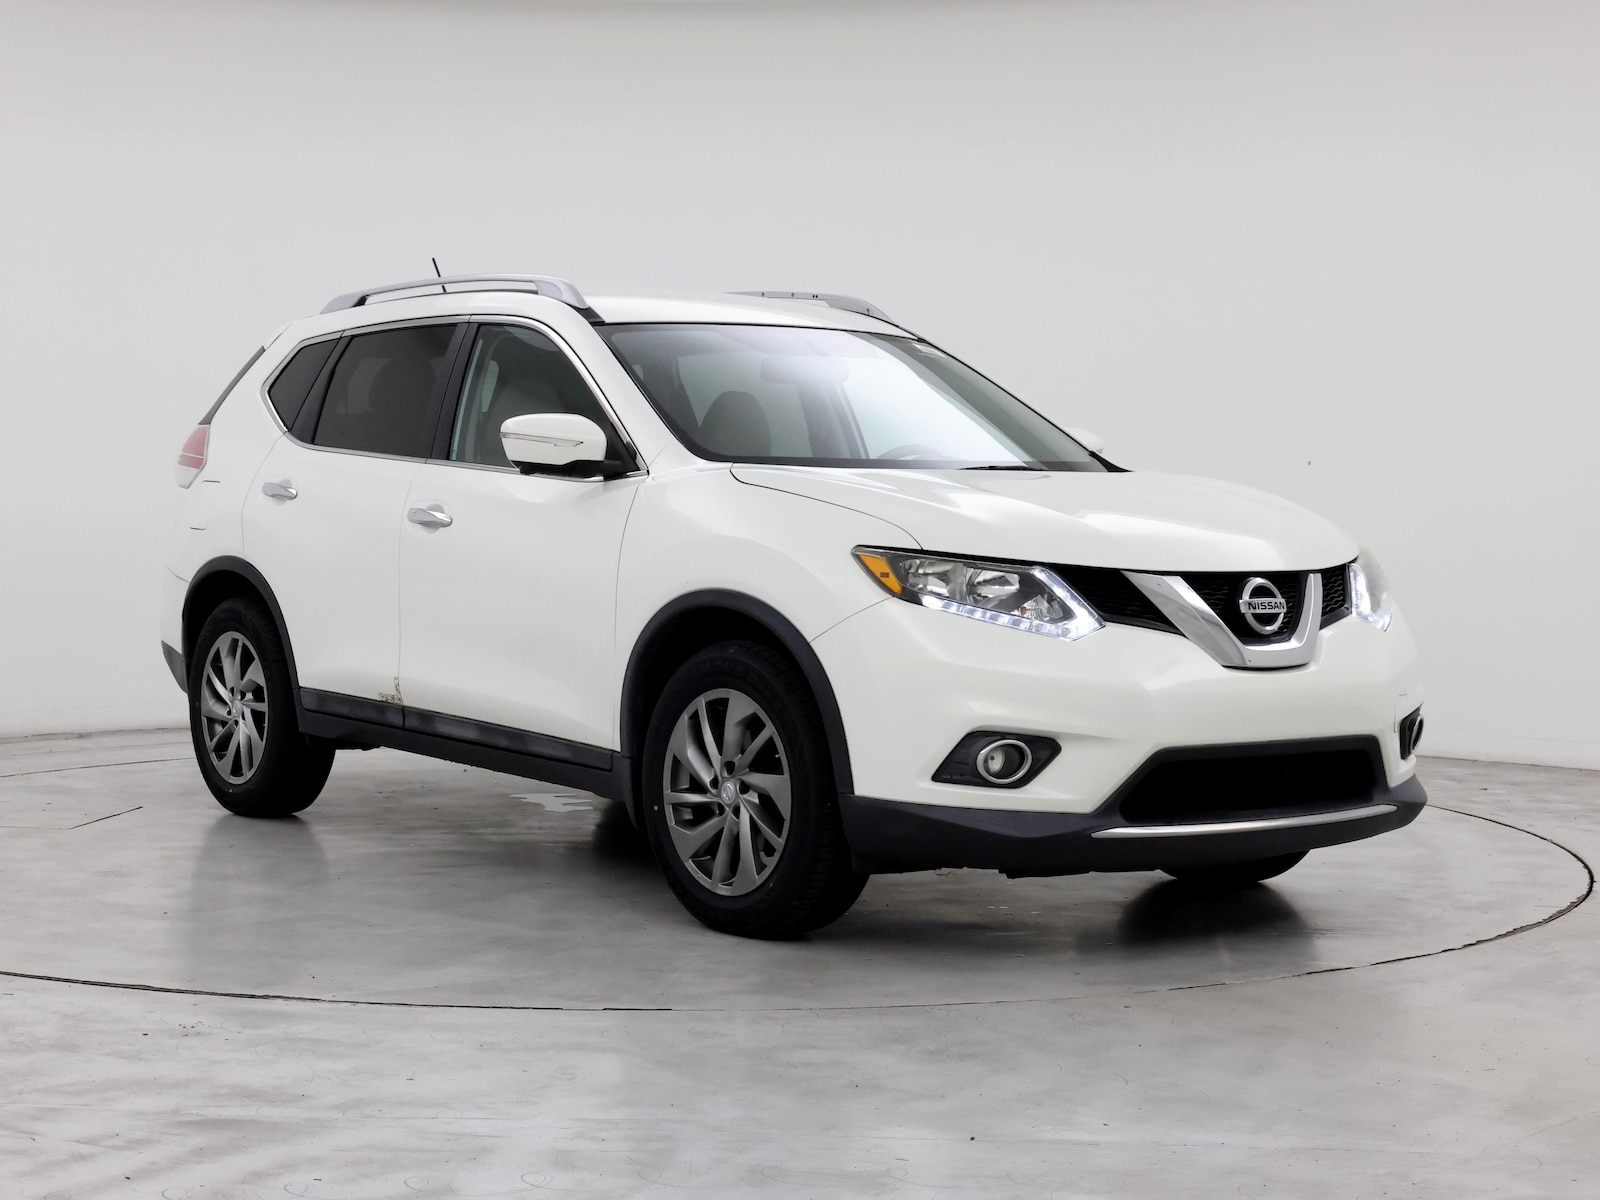 Used 2014 Nissan Rogue SL with VIN 5N1AT2MT8EC862881 for sale in Kenosha, WI